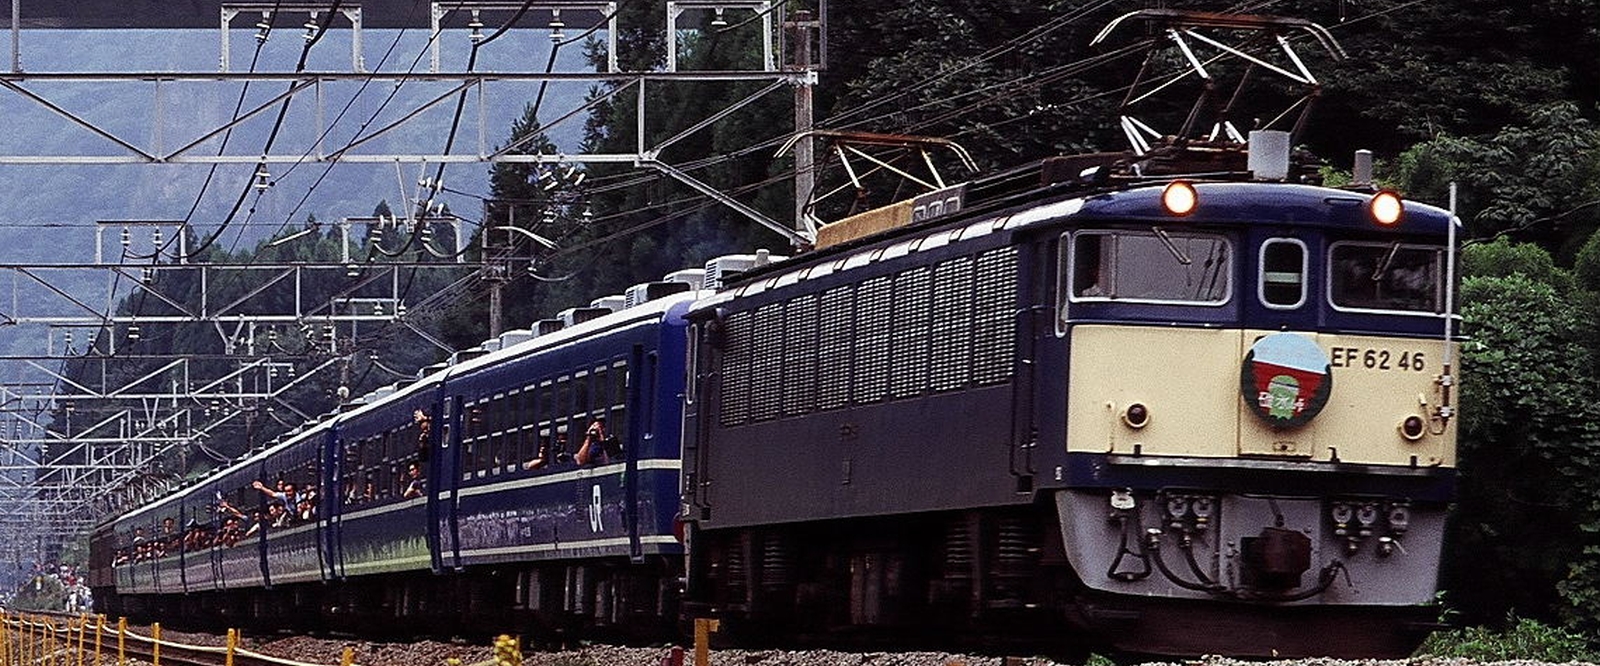 EF62 46 of JR East in 1997 in front of an excursion train